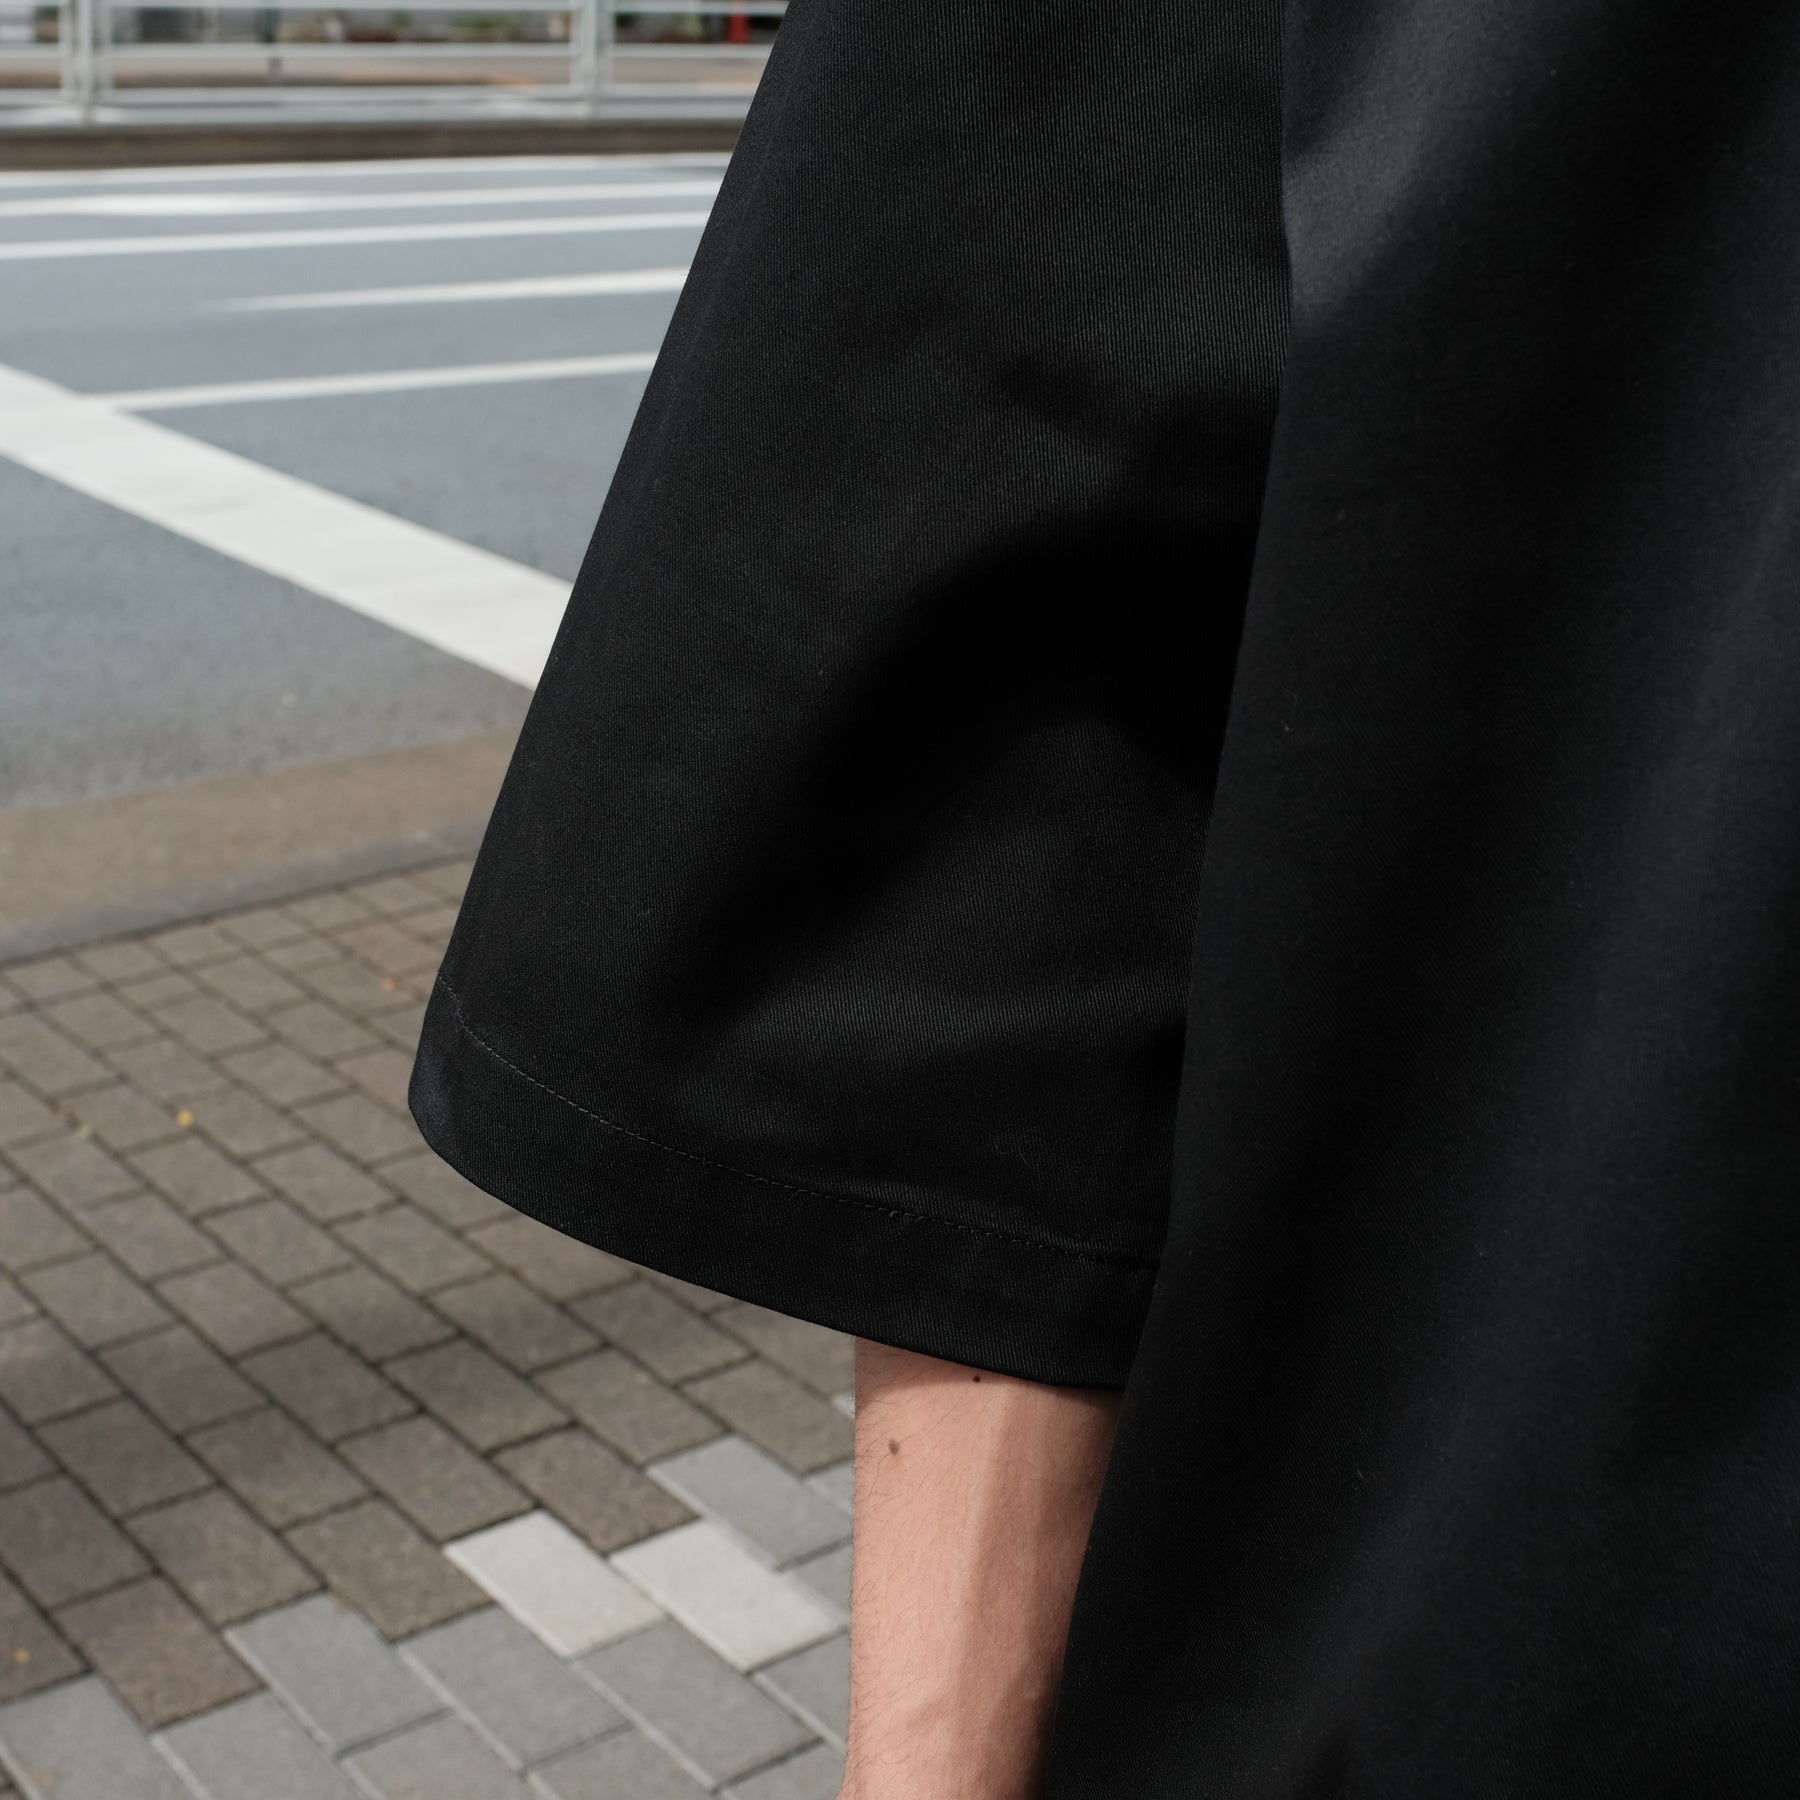 WILLY CHAVARRIA × FB County / WORK SHIRT BLACK